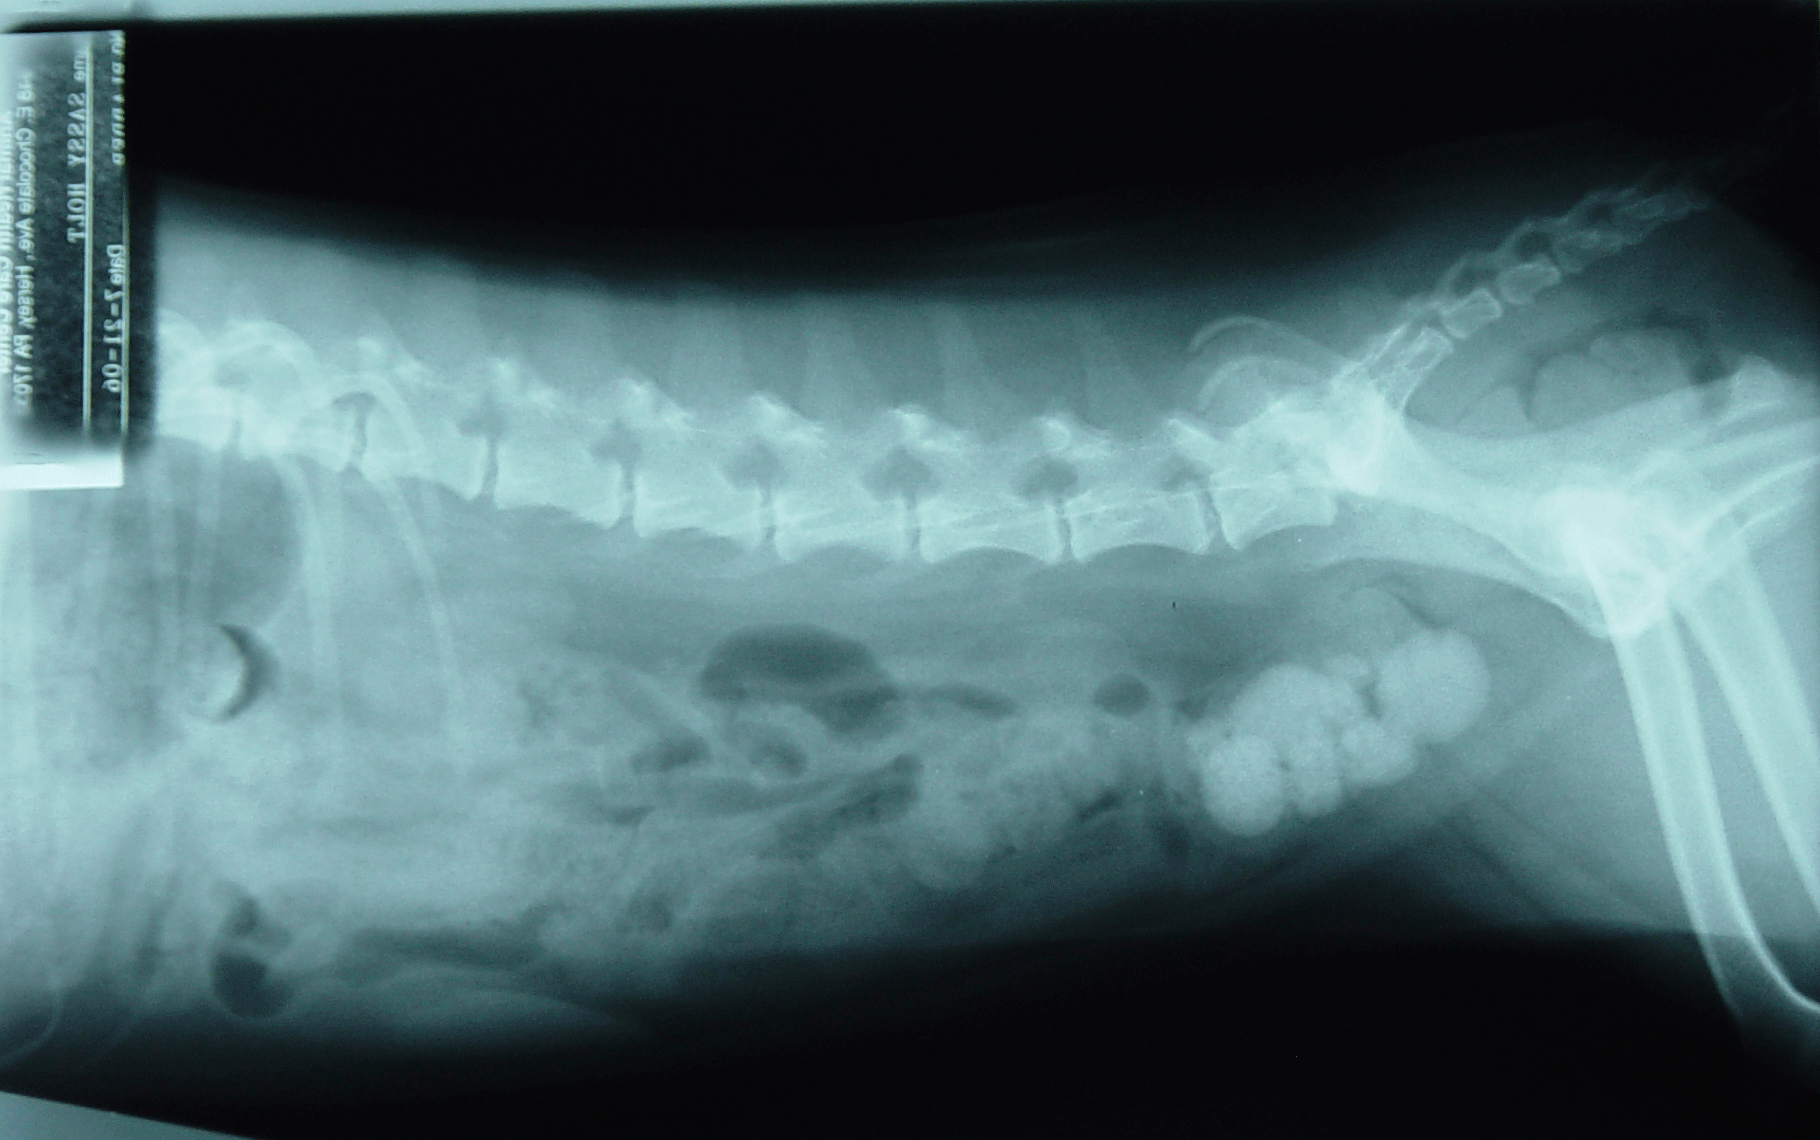 A radiograph of an abdomen with bladder stones